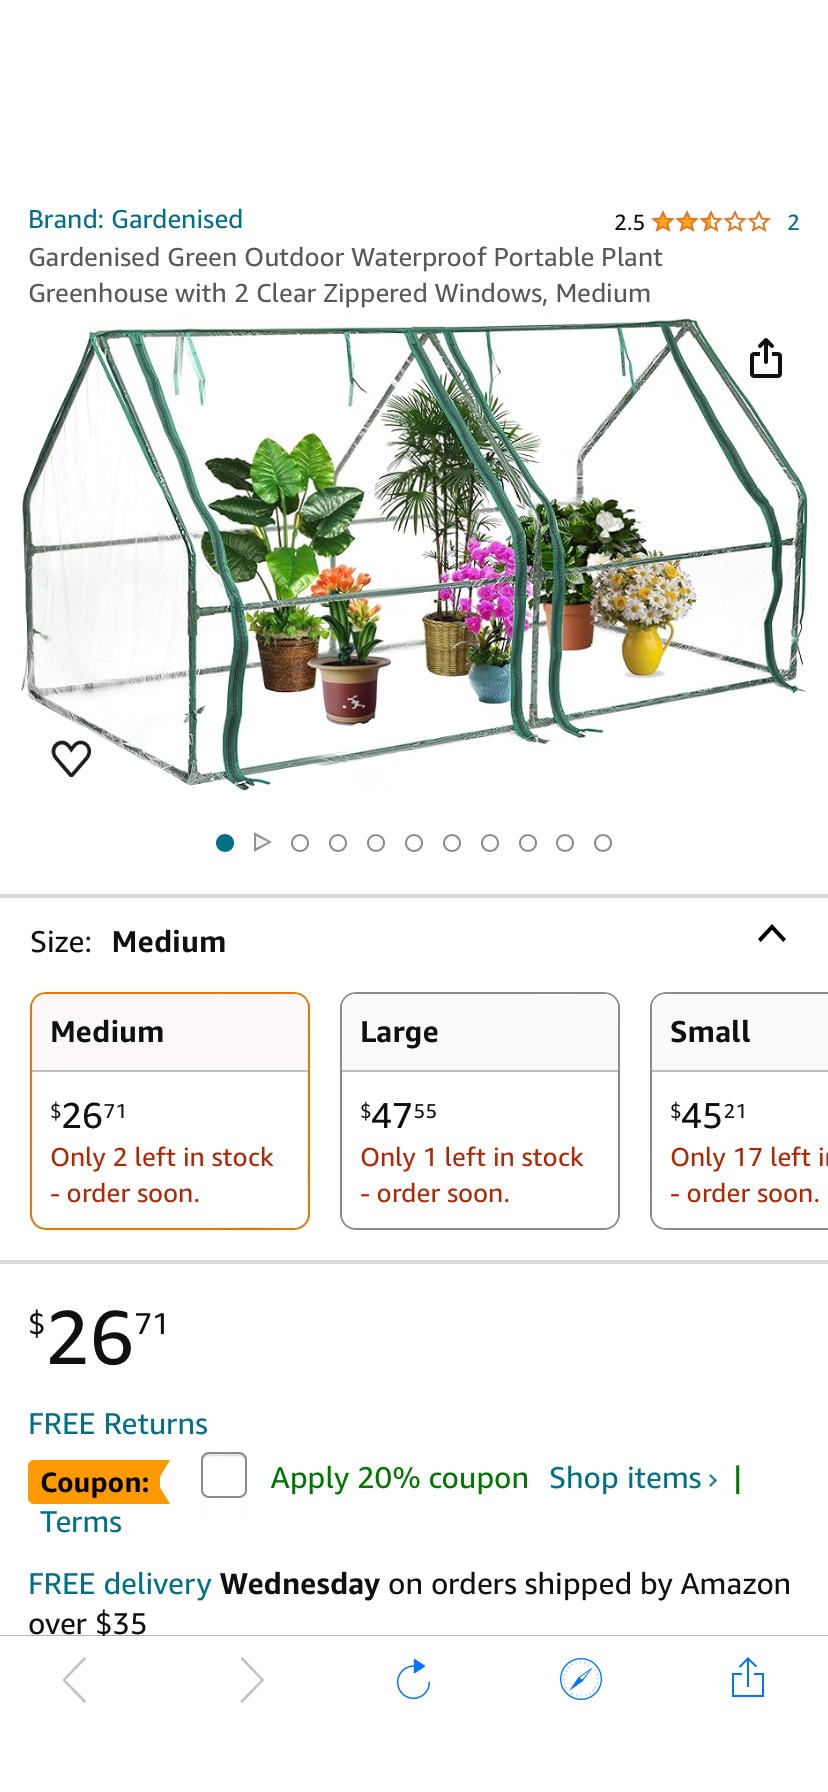 Amazon.com : Gardenised Green Outdoor Waterproof Portable Plant Greenhouse with 2 Clear Zippered Windows, Medium : Patio, Lawn & Garden